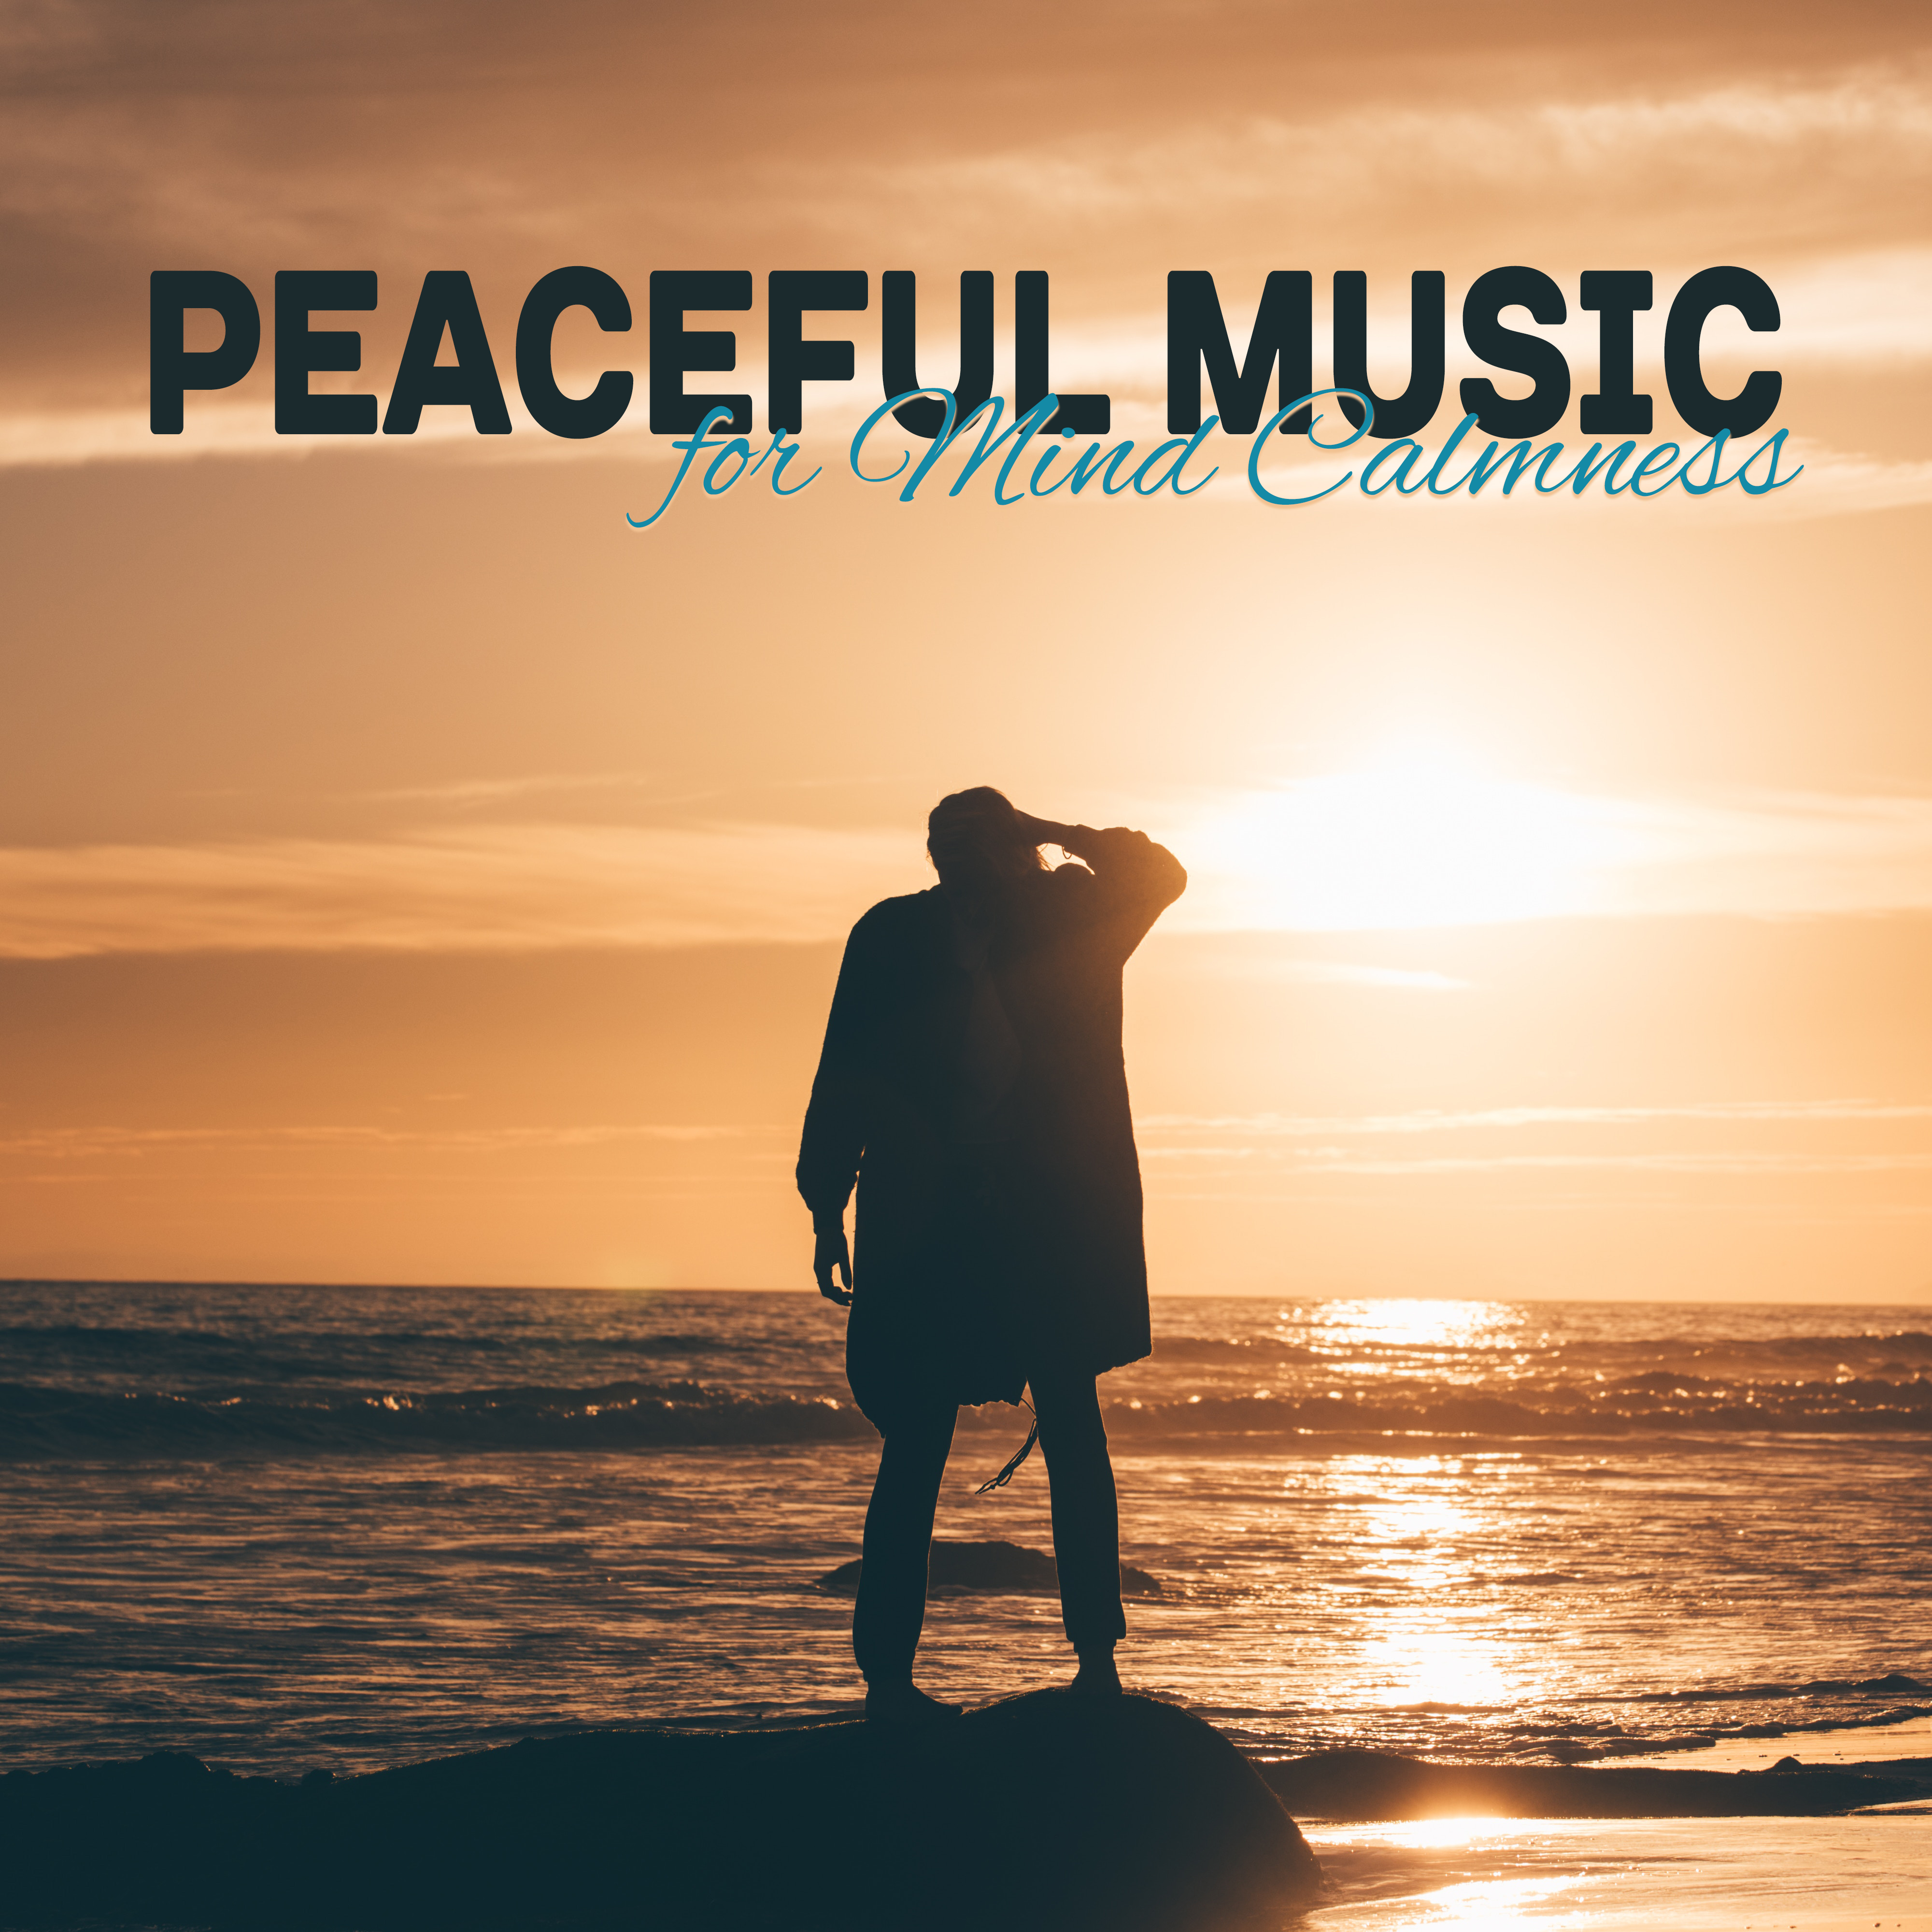 Peaceful Music for Mind Calmness – Healing Touch, Clear Mind, Keep Calm, Stress Free, Easy Listening, New Age Melodies